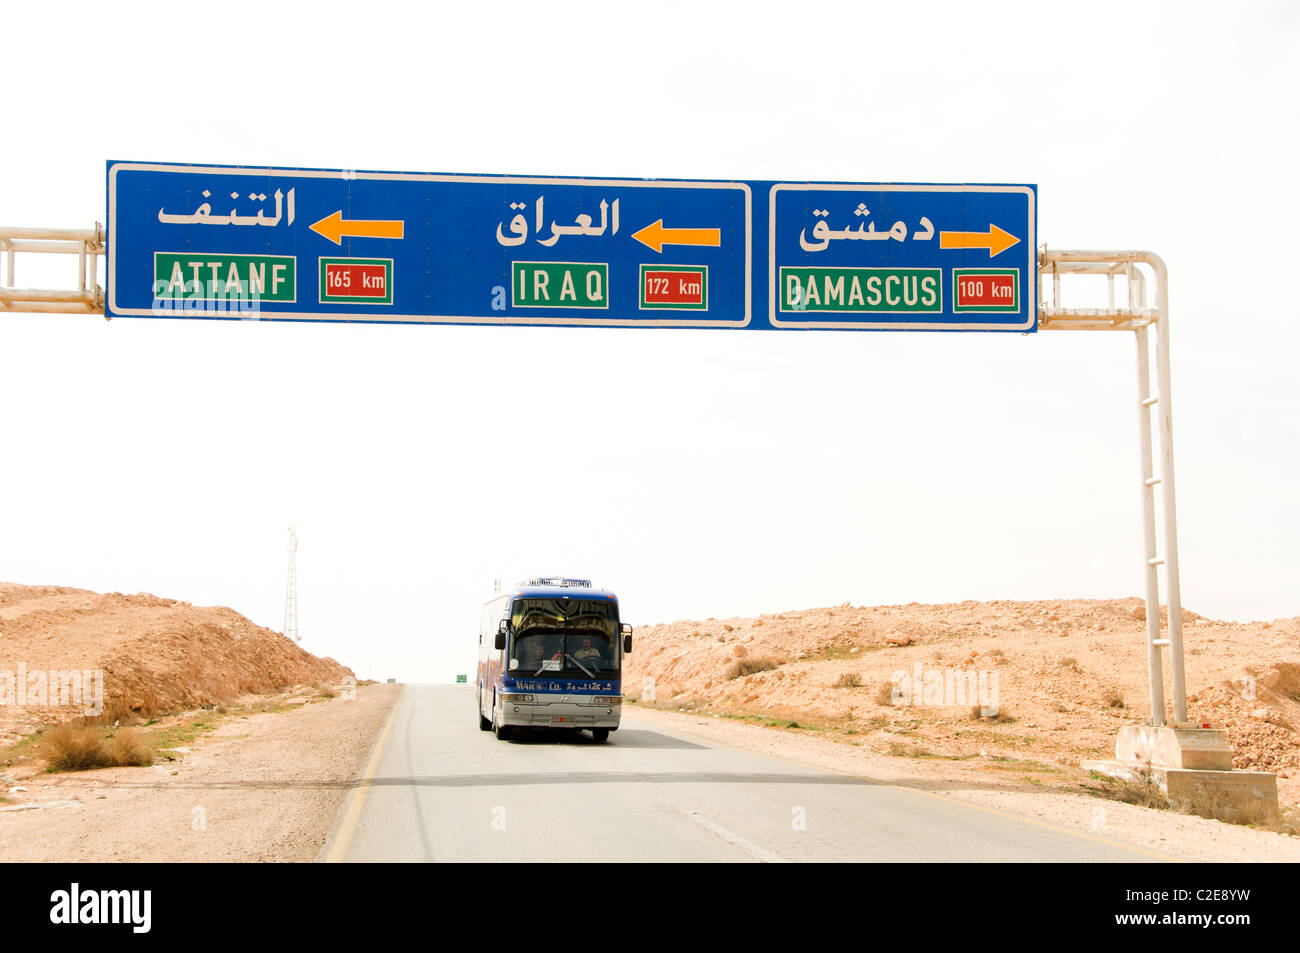 Damas Syrie Iraq Attane Road traffic Sign truck Banque D'Images